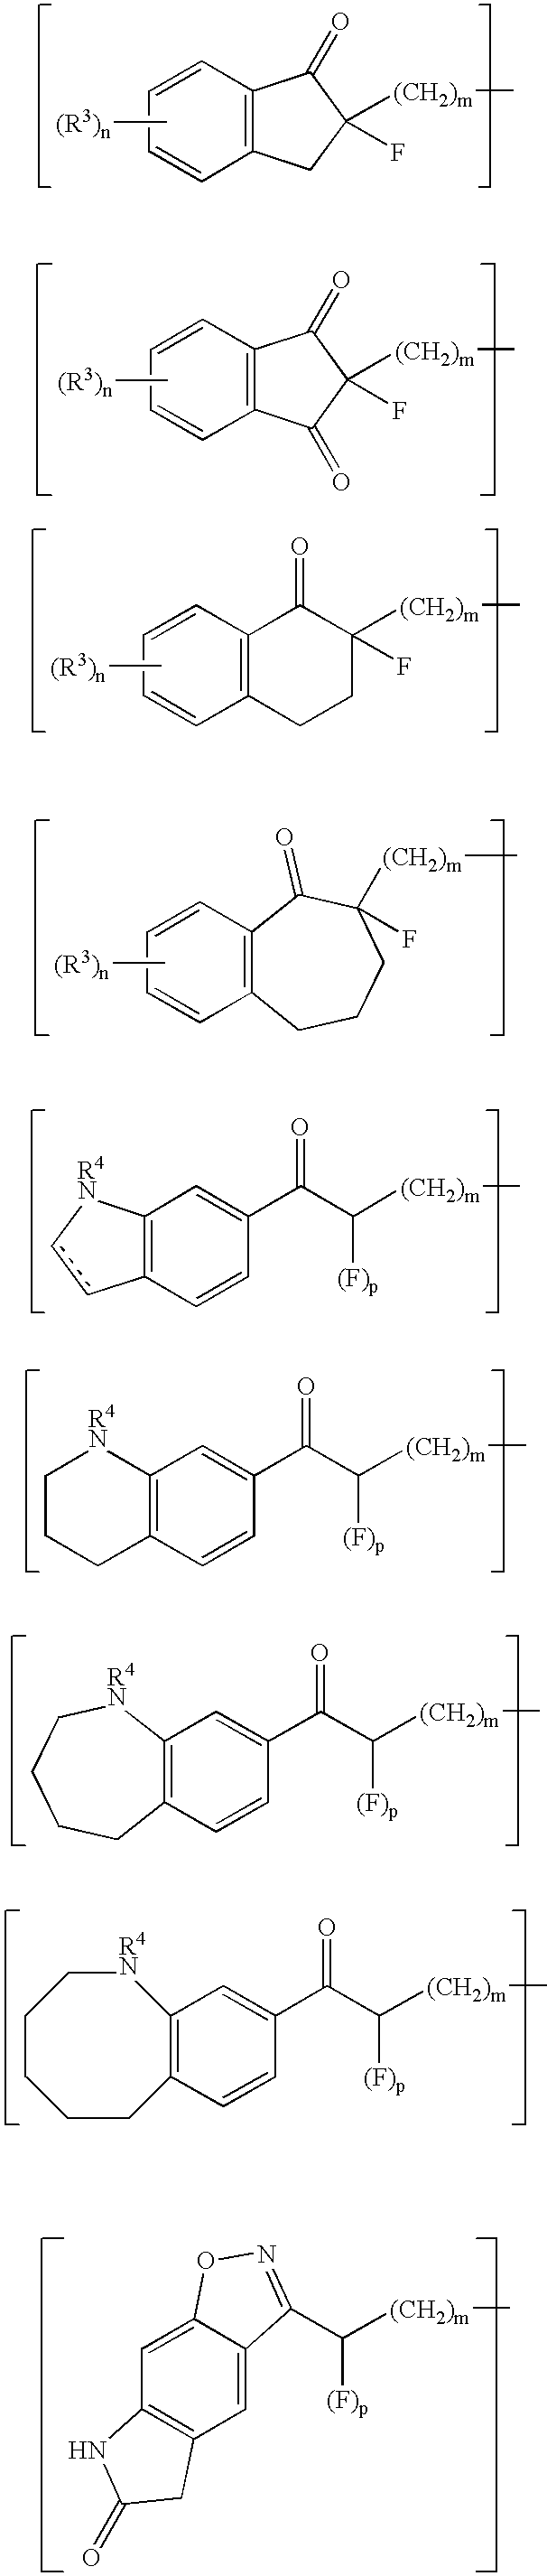 Fluorides of 4-substituted piperidine derivatives